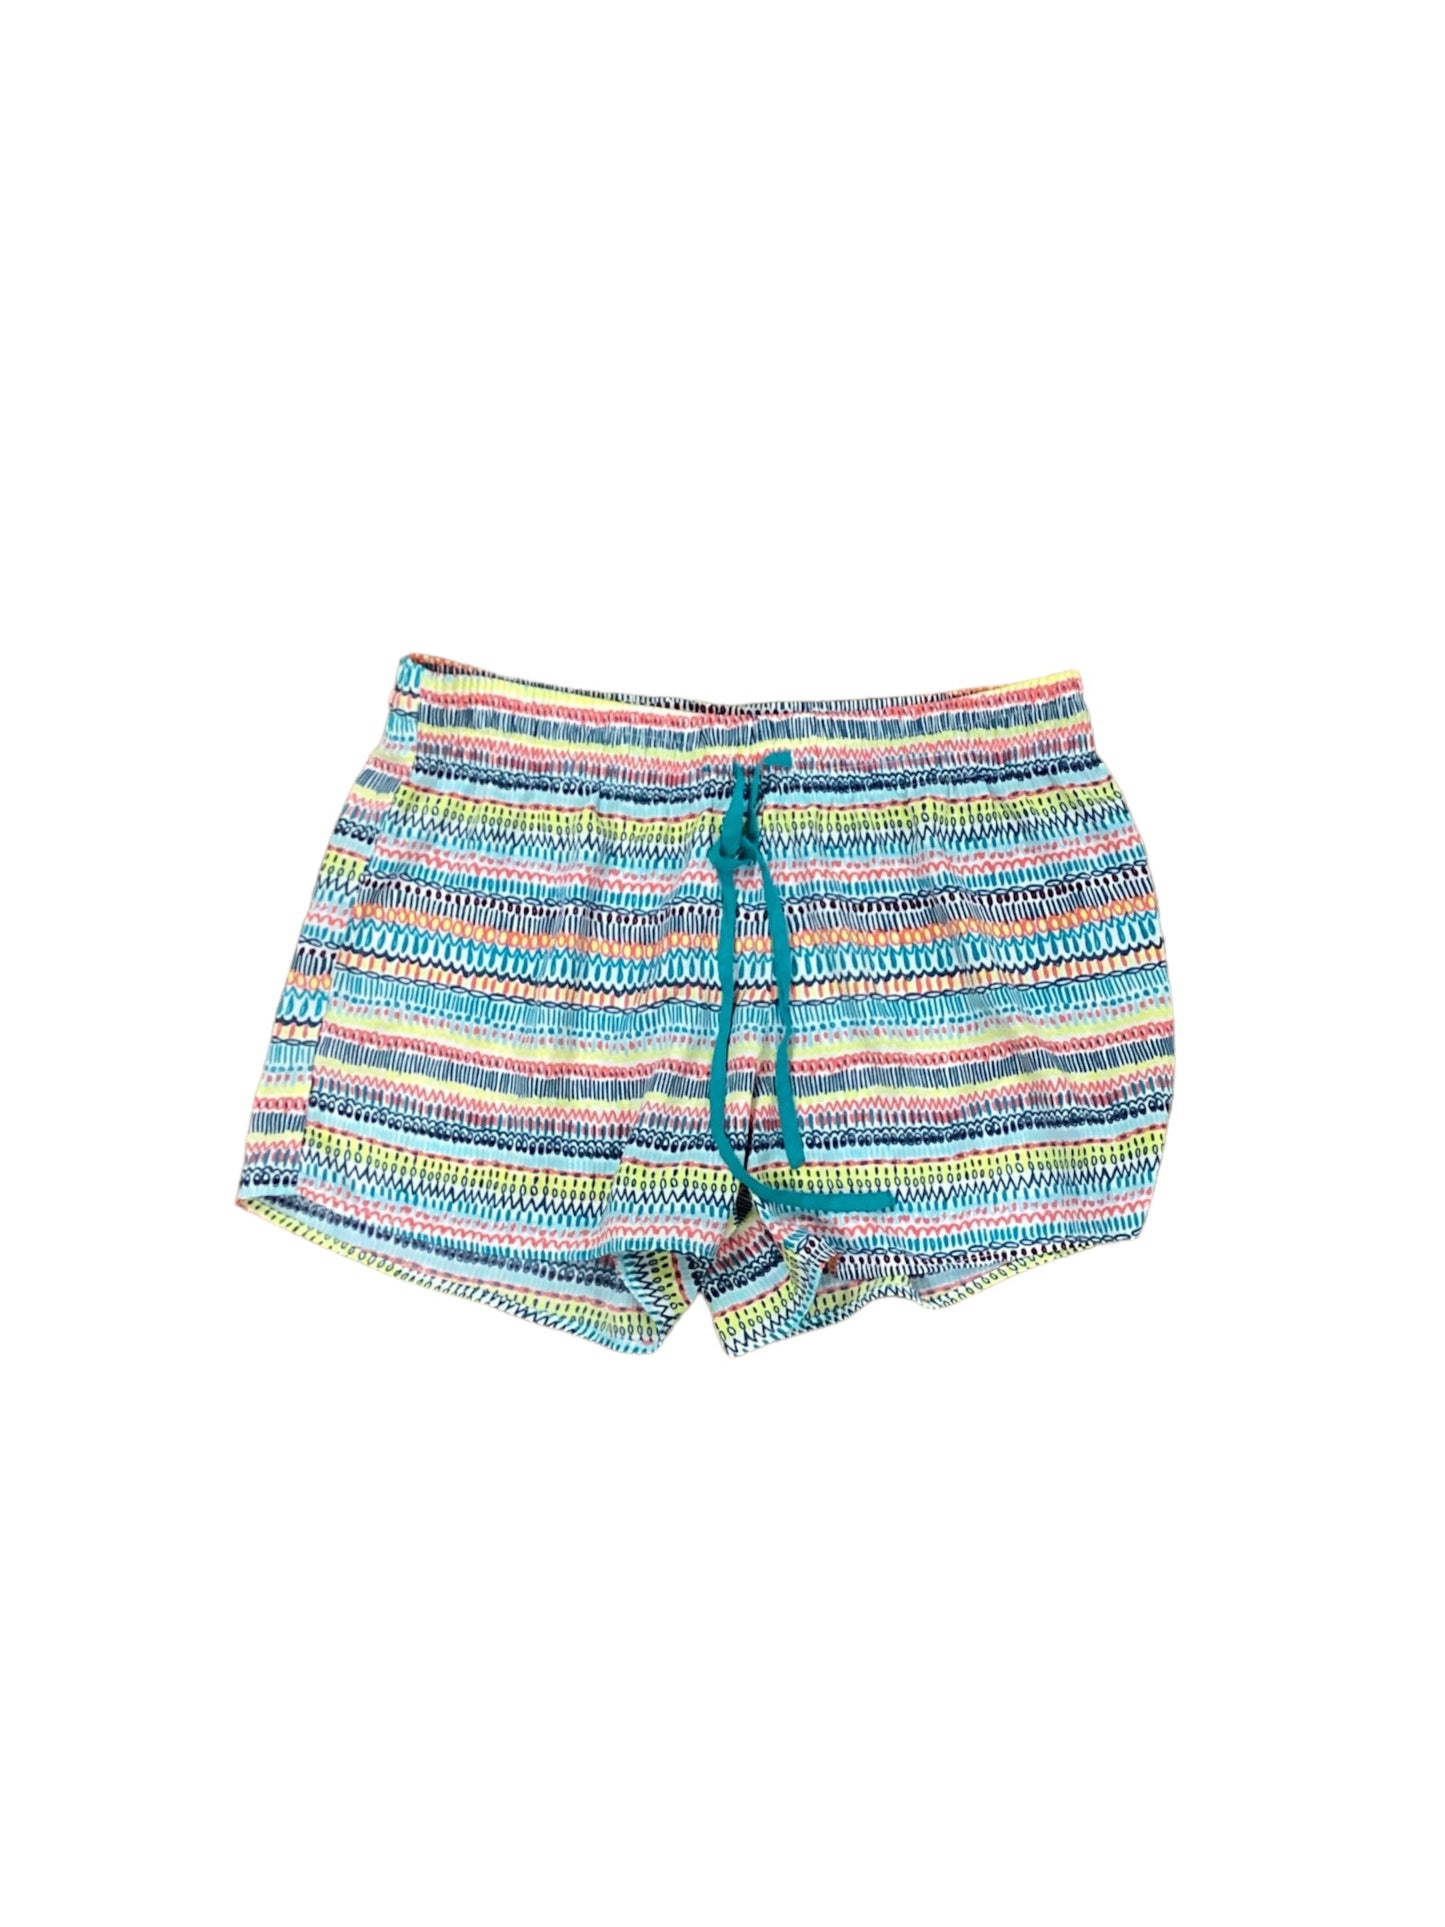 Multi-colored Shorts Gilligan And Omalley, Size M